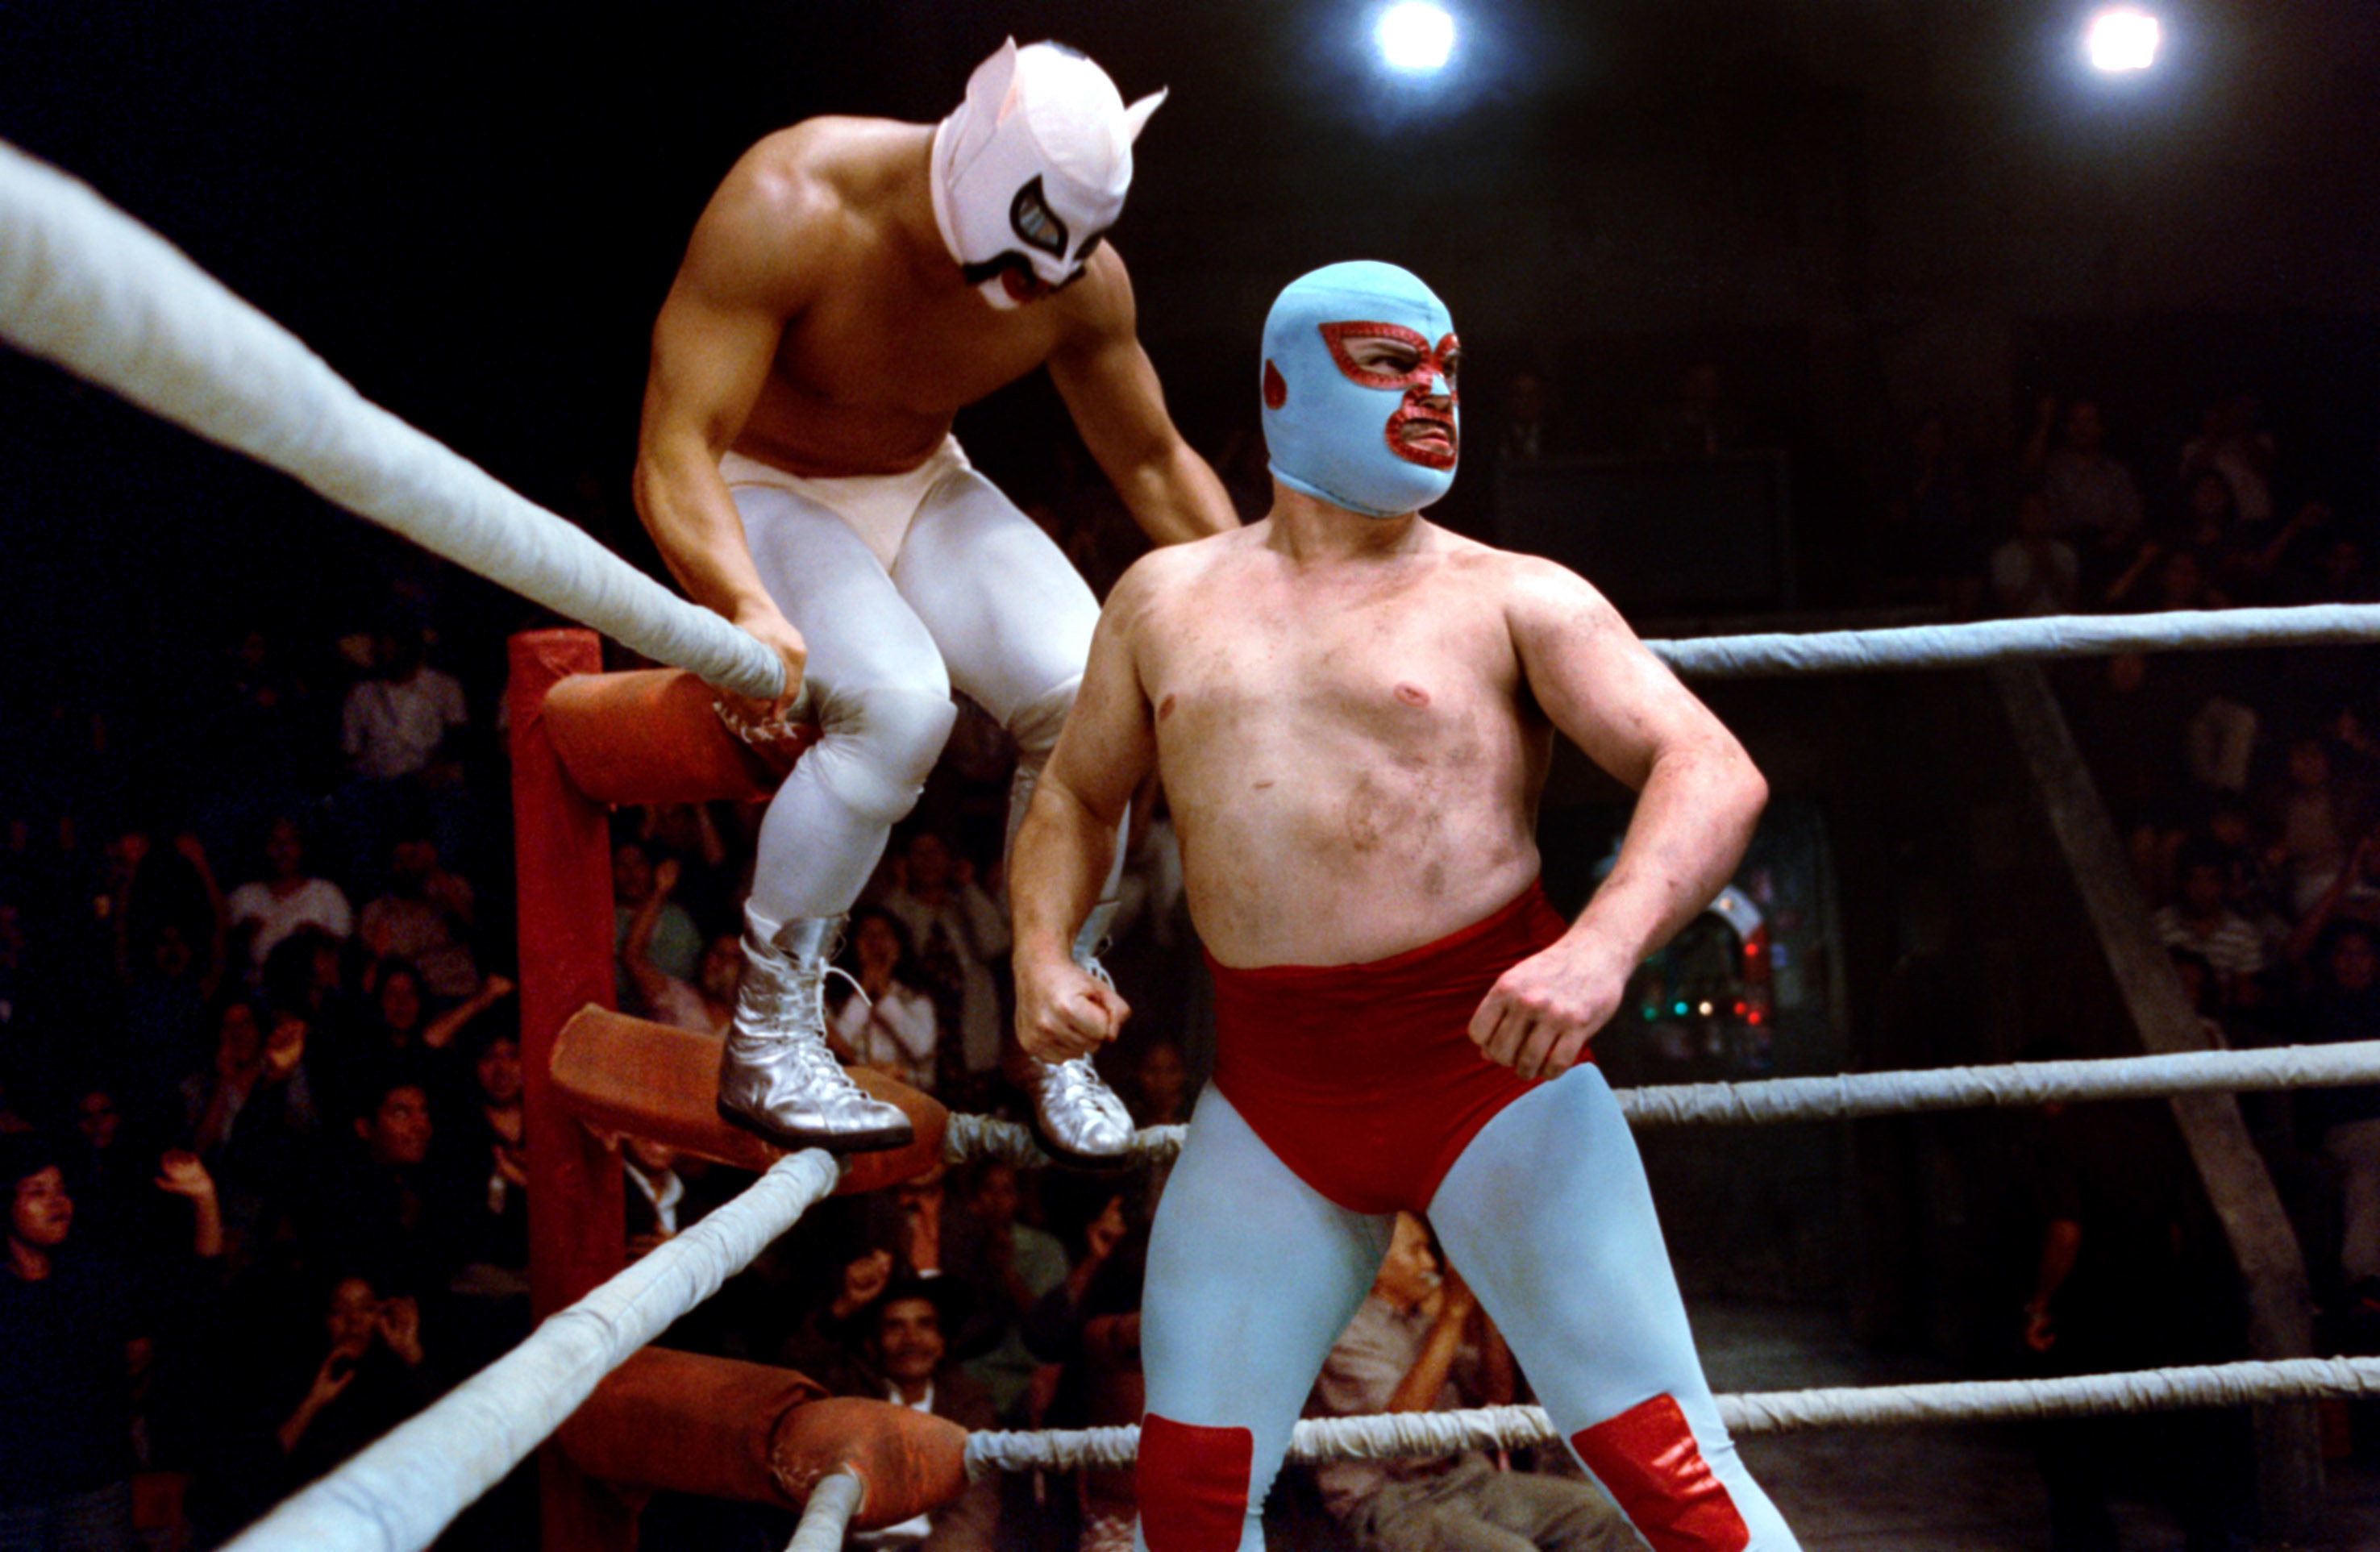 Nacho Libre in the corner of the ring